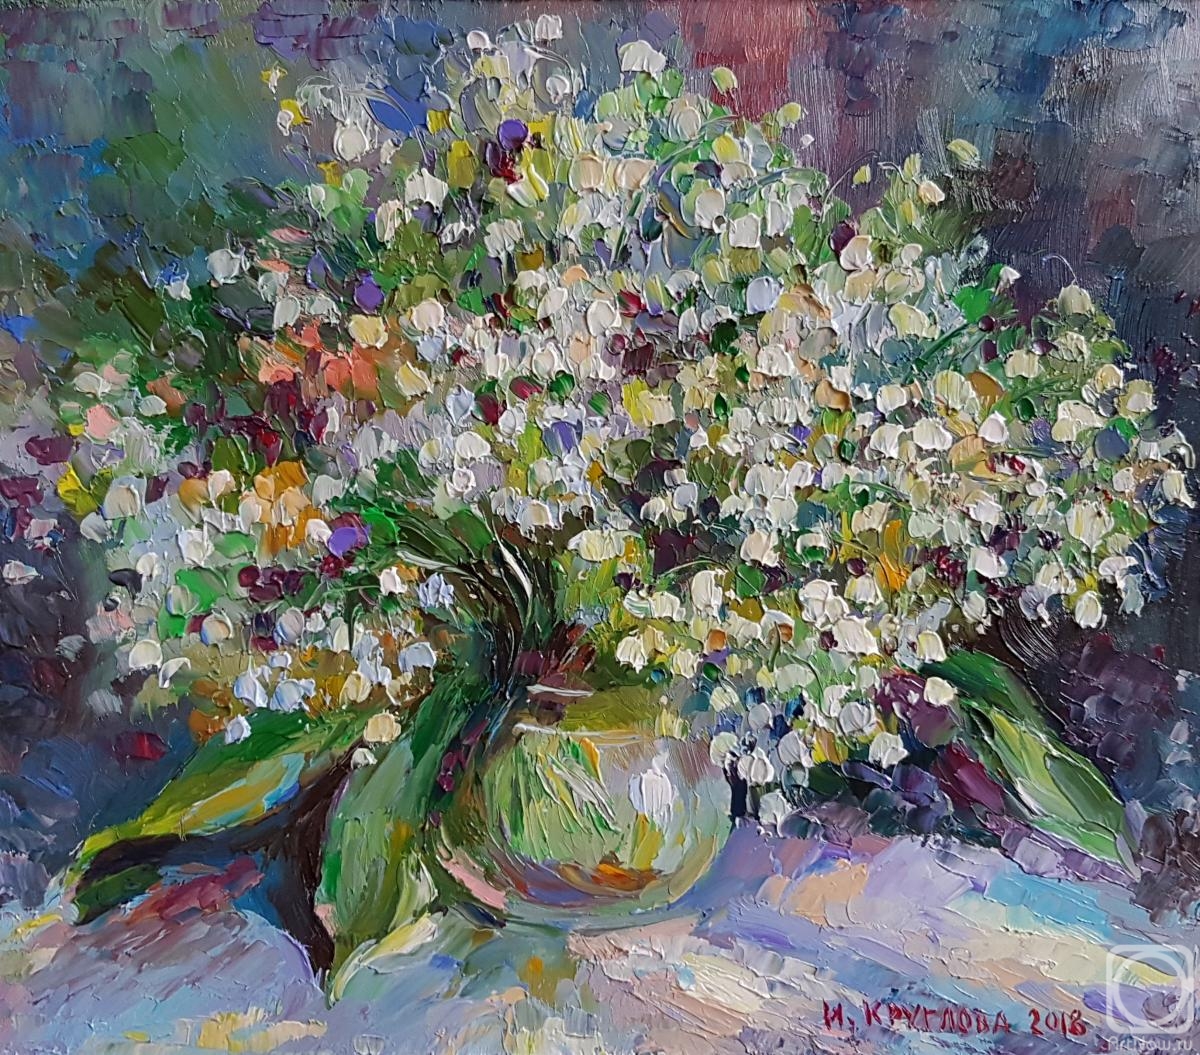 Kruglova Irina. Lilies of the valley on the table